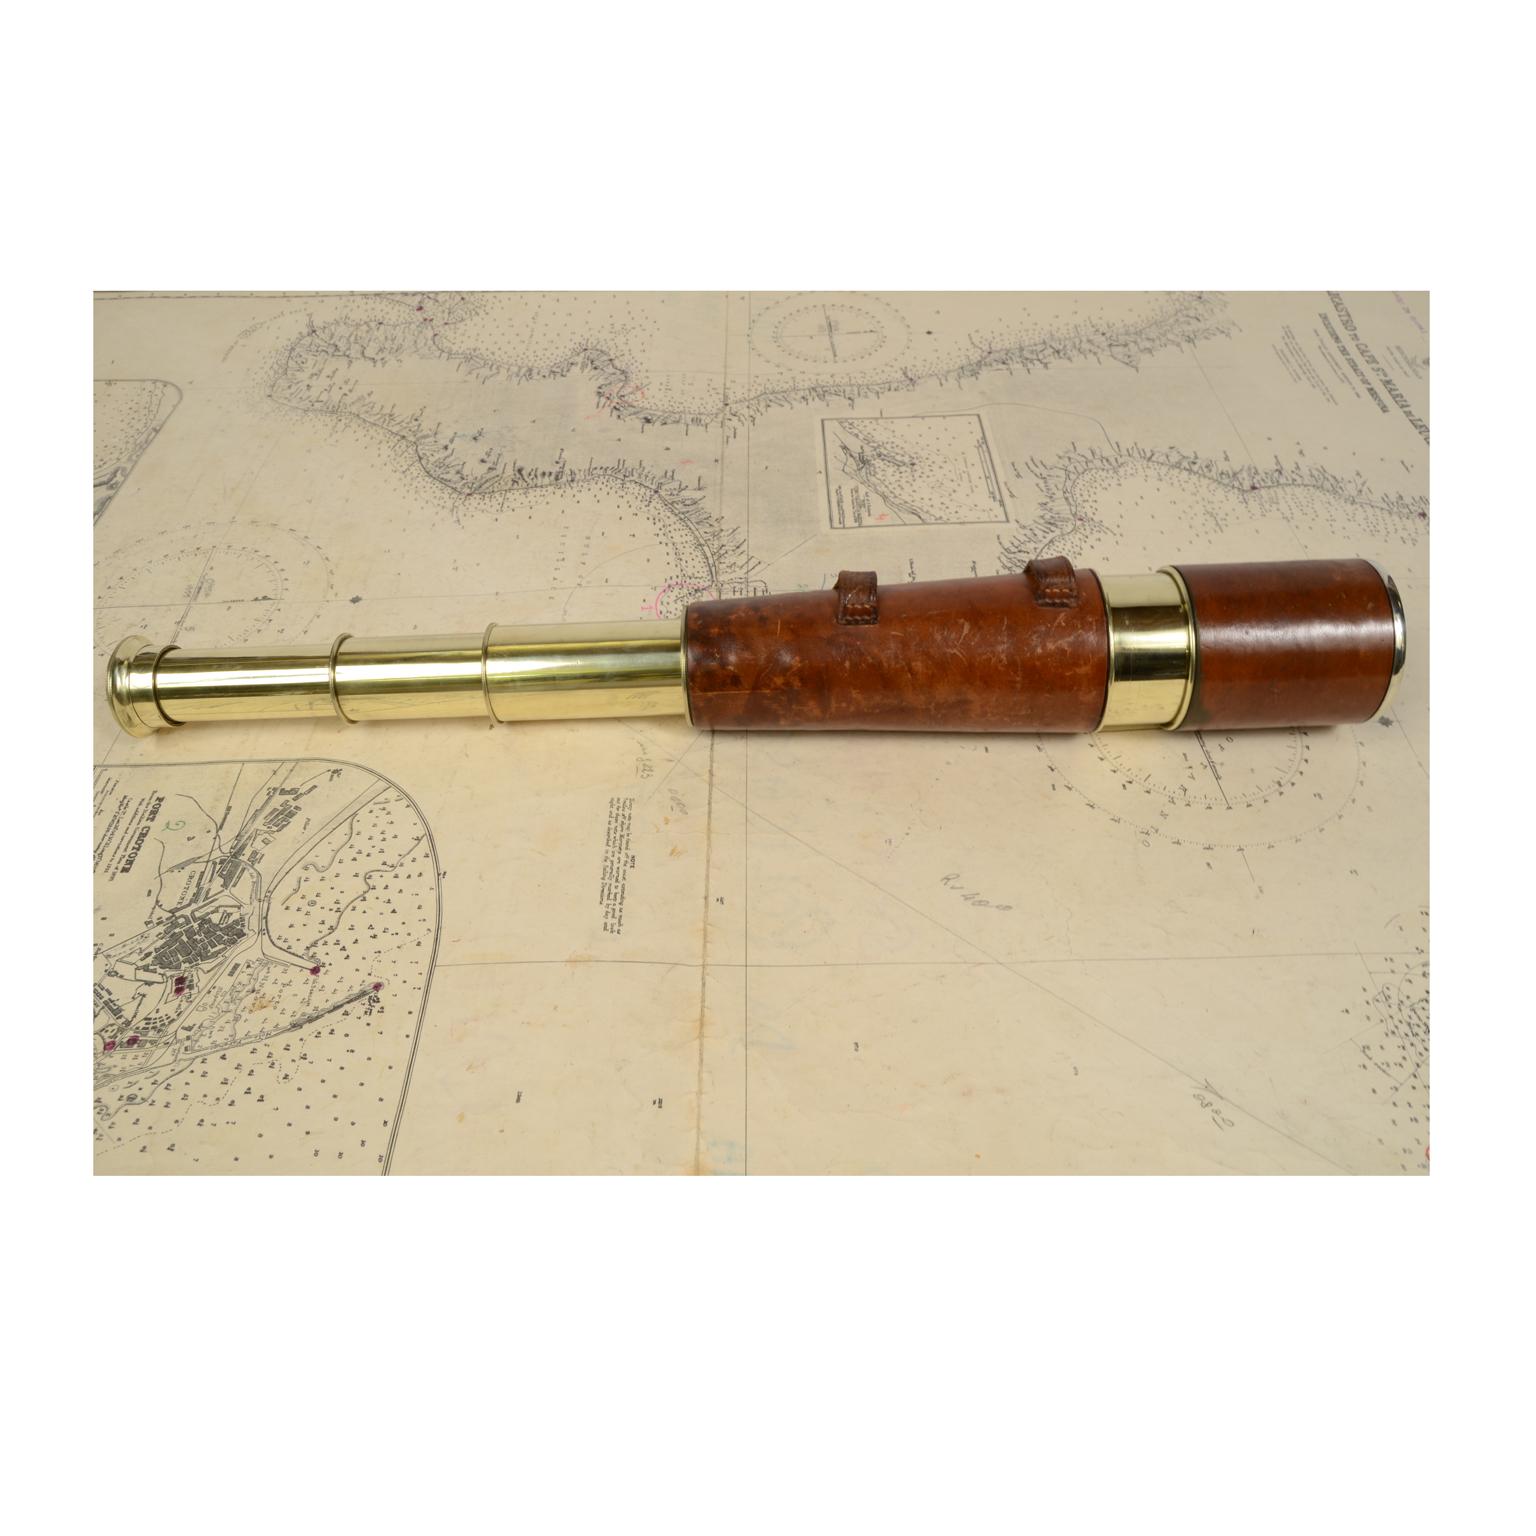 Brass telescope with splayed leather-covered handle signed Broadhurst Clarkson & C. 83 Farringdon Road London E.C. from the early 1900s. Focusing with three extensions complete with dust cover tab and sun visor extension. Maximum length 80 cm,